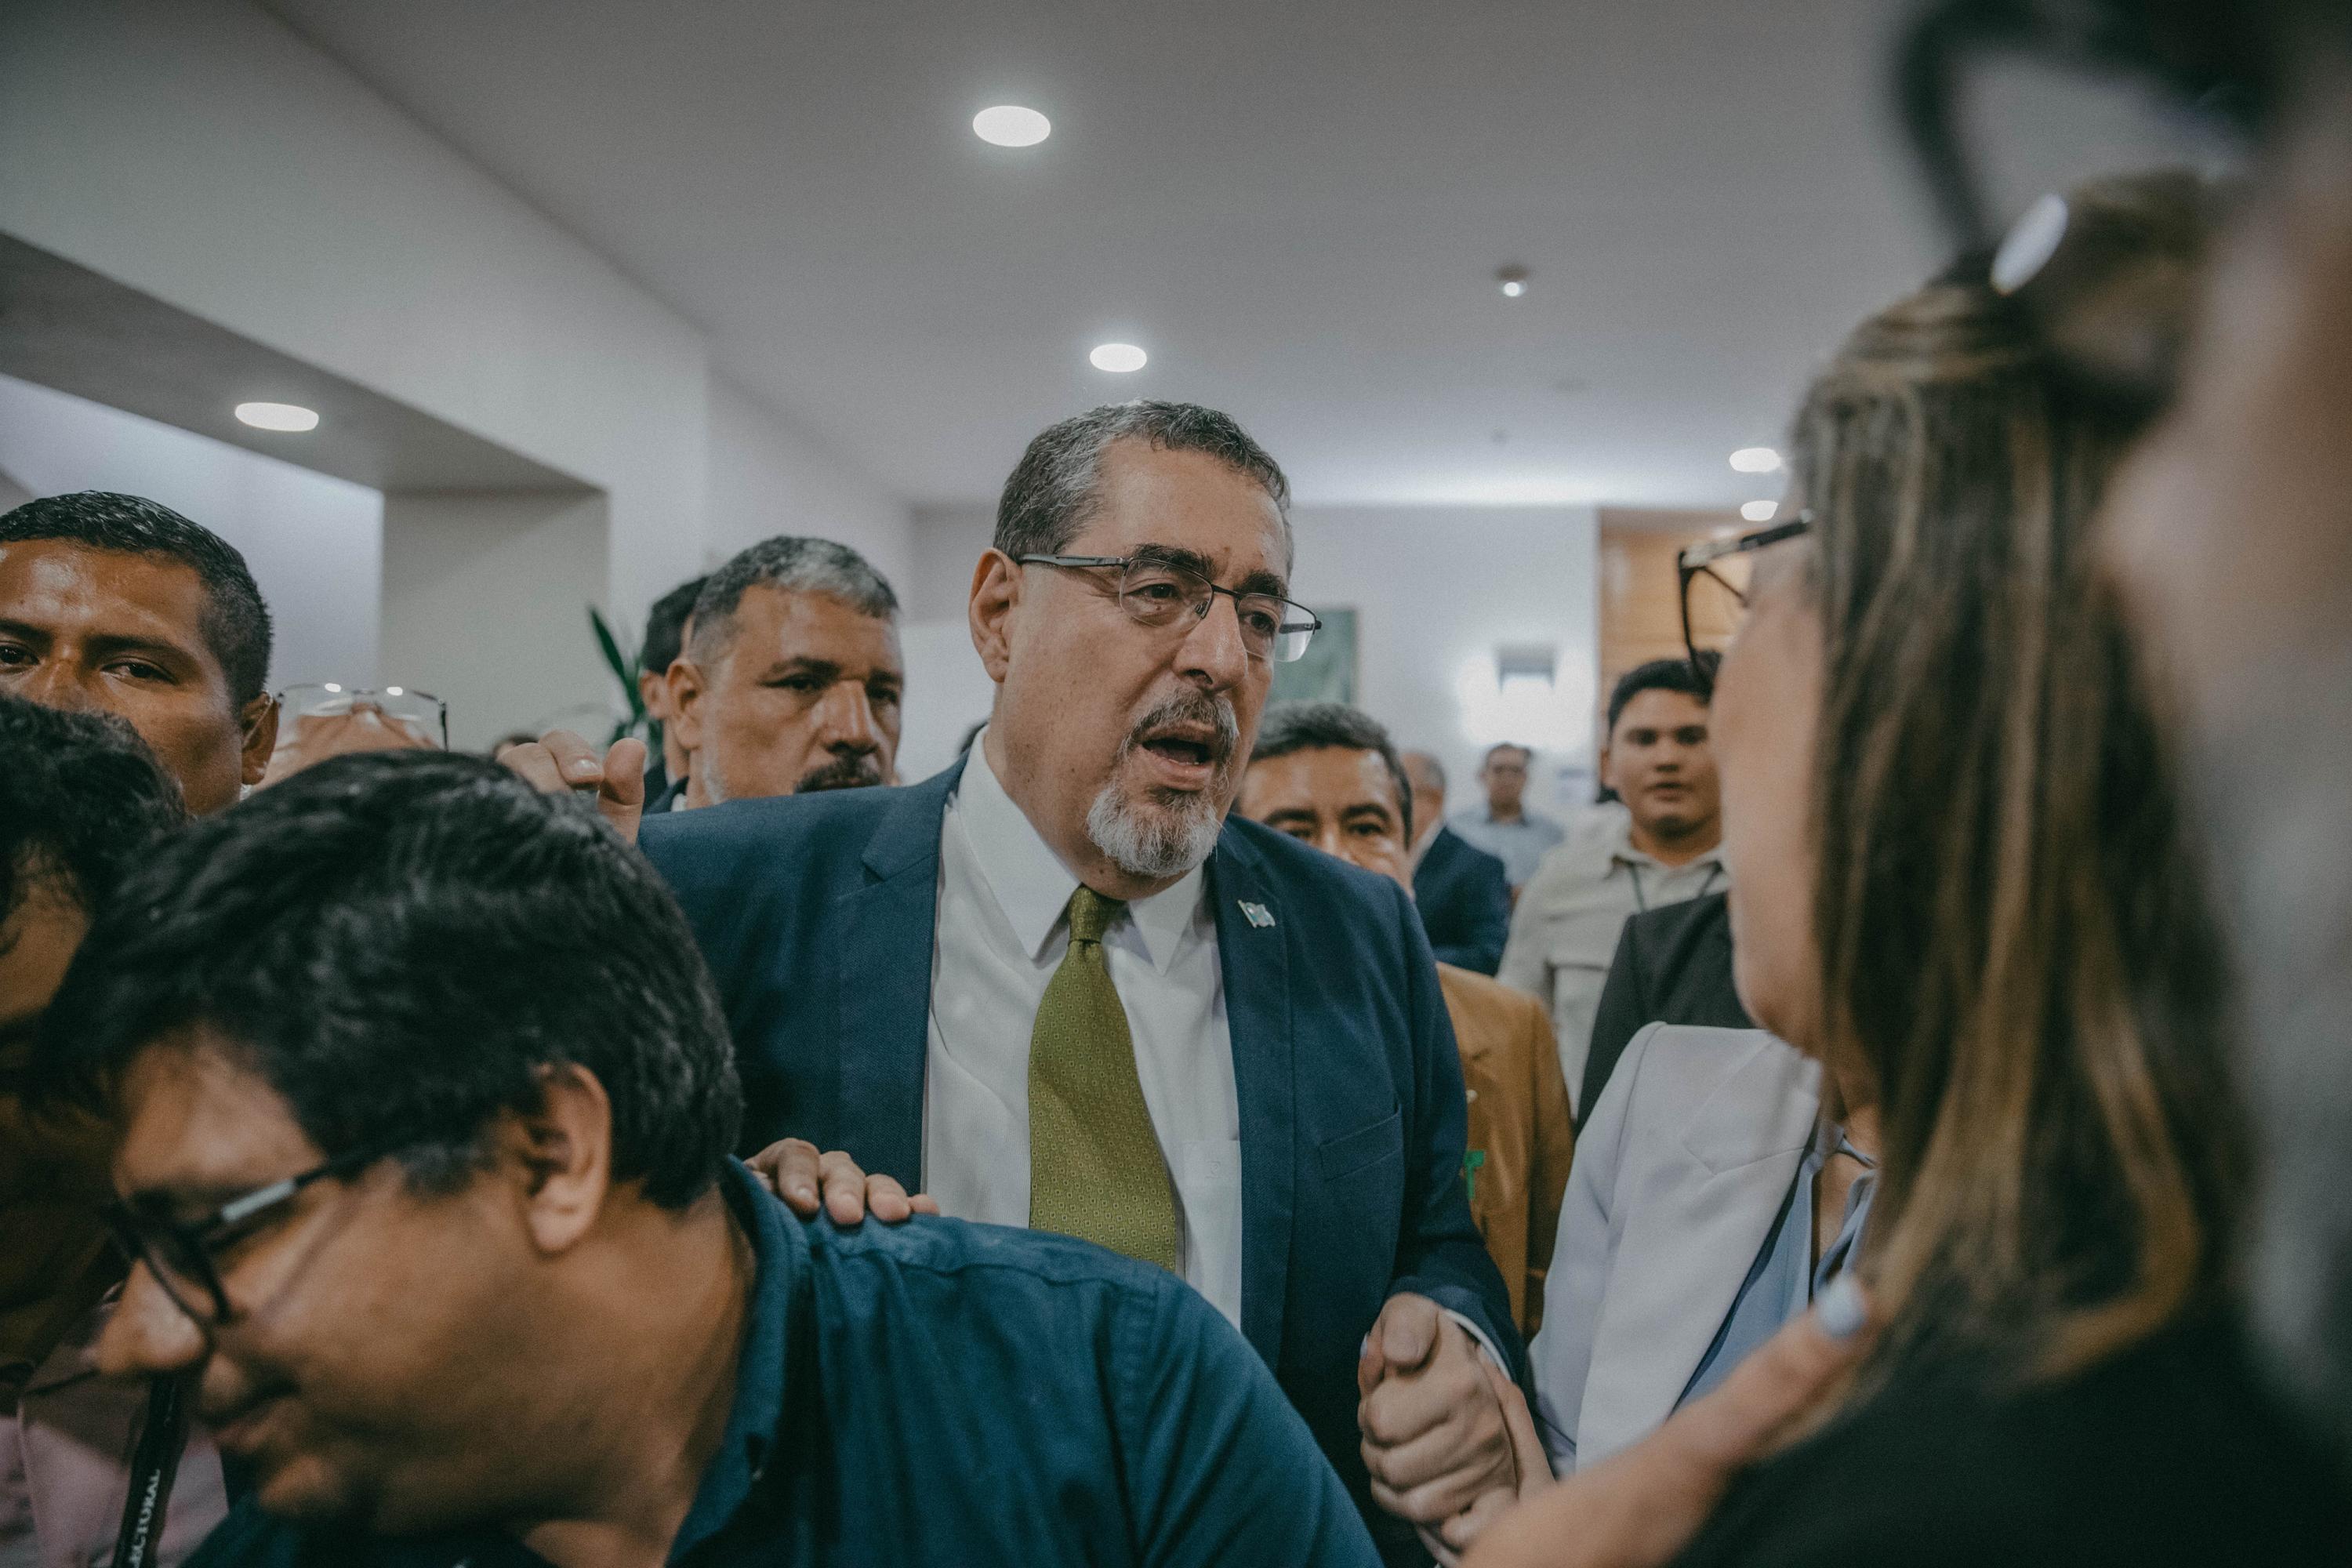 By 8:30 p.m. on Sunday, August 20, the Supreme Electoral Tribunal had proclaimed Bernardo Arévalo the “virtual winner.” Around him, in a private room in the Las Américas Hotel in Guatemala City, his campaign team shouted, “Yes, we could! We did it!”